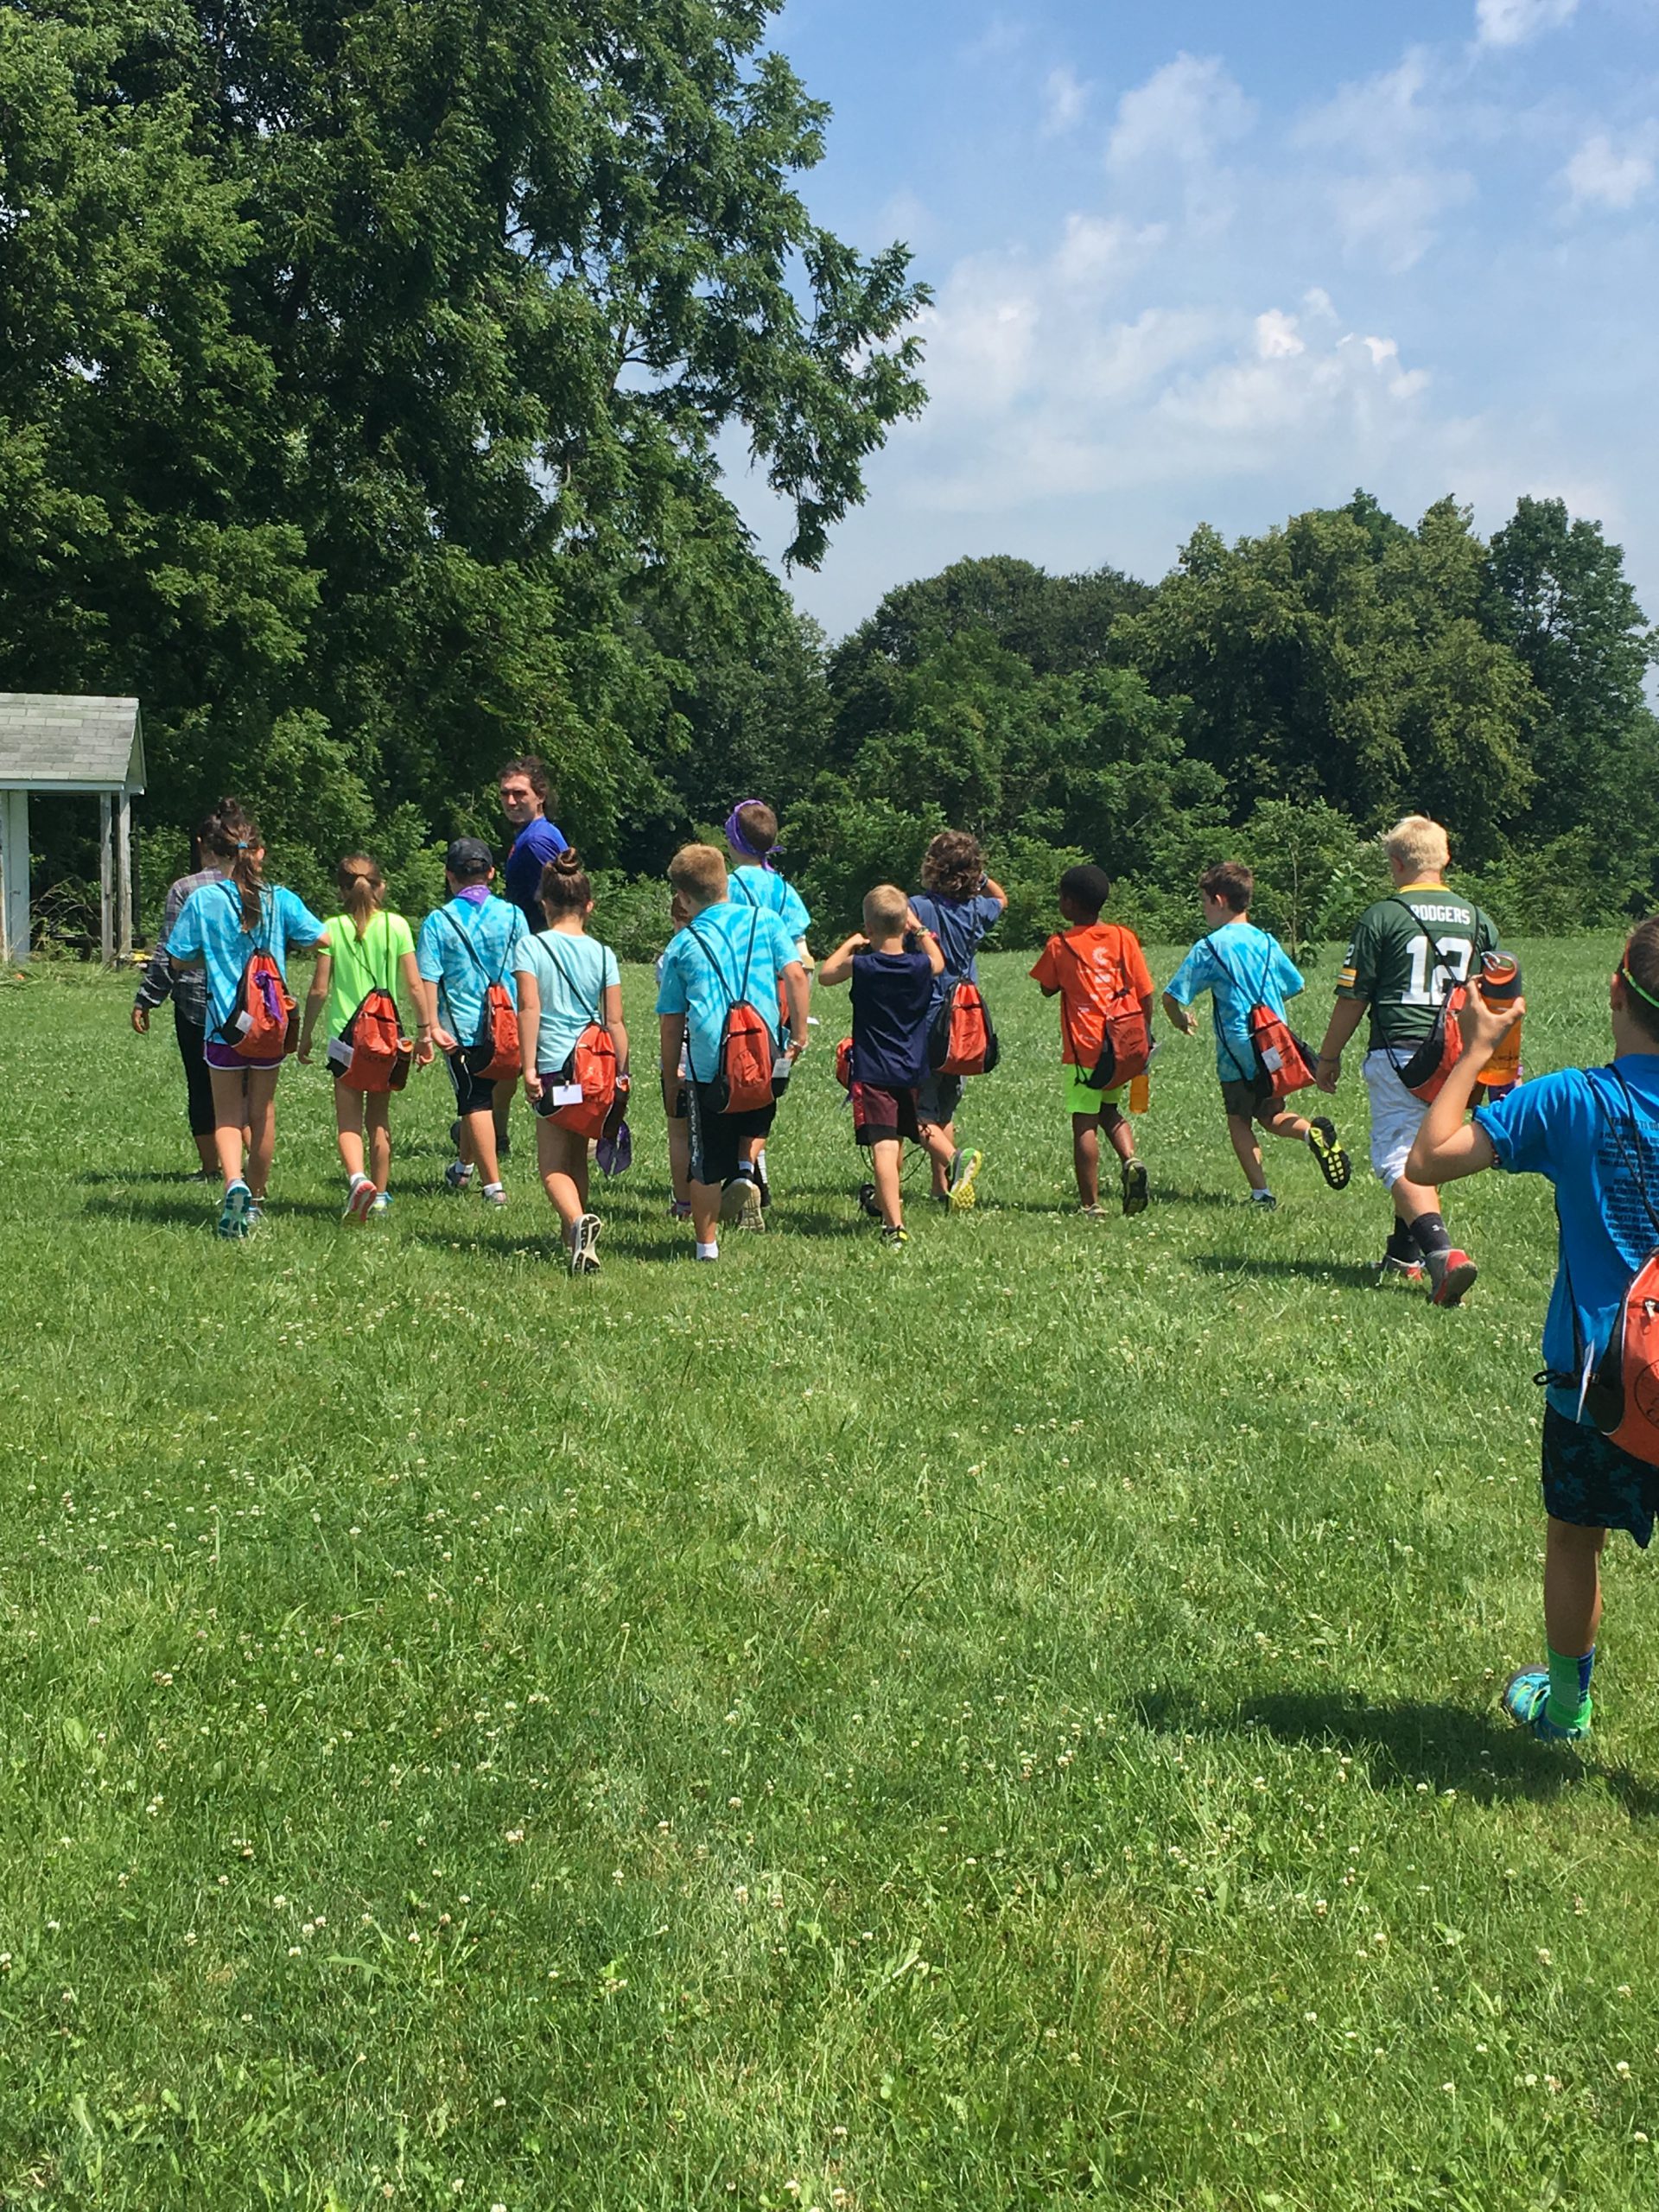 A large group of elementary-school aged children in shorts and short-sleeved shirts walking away from the viewer on a large grassy field.